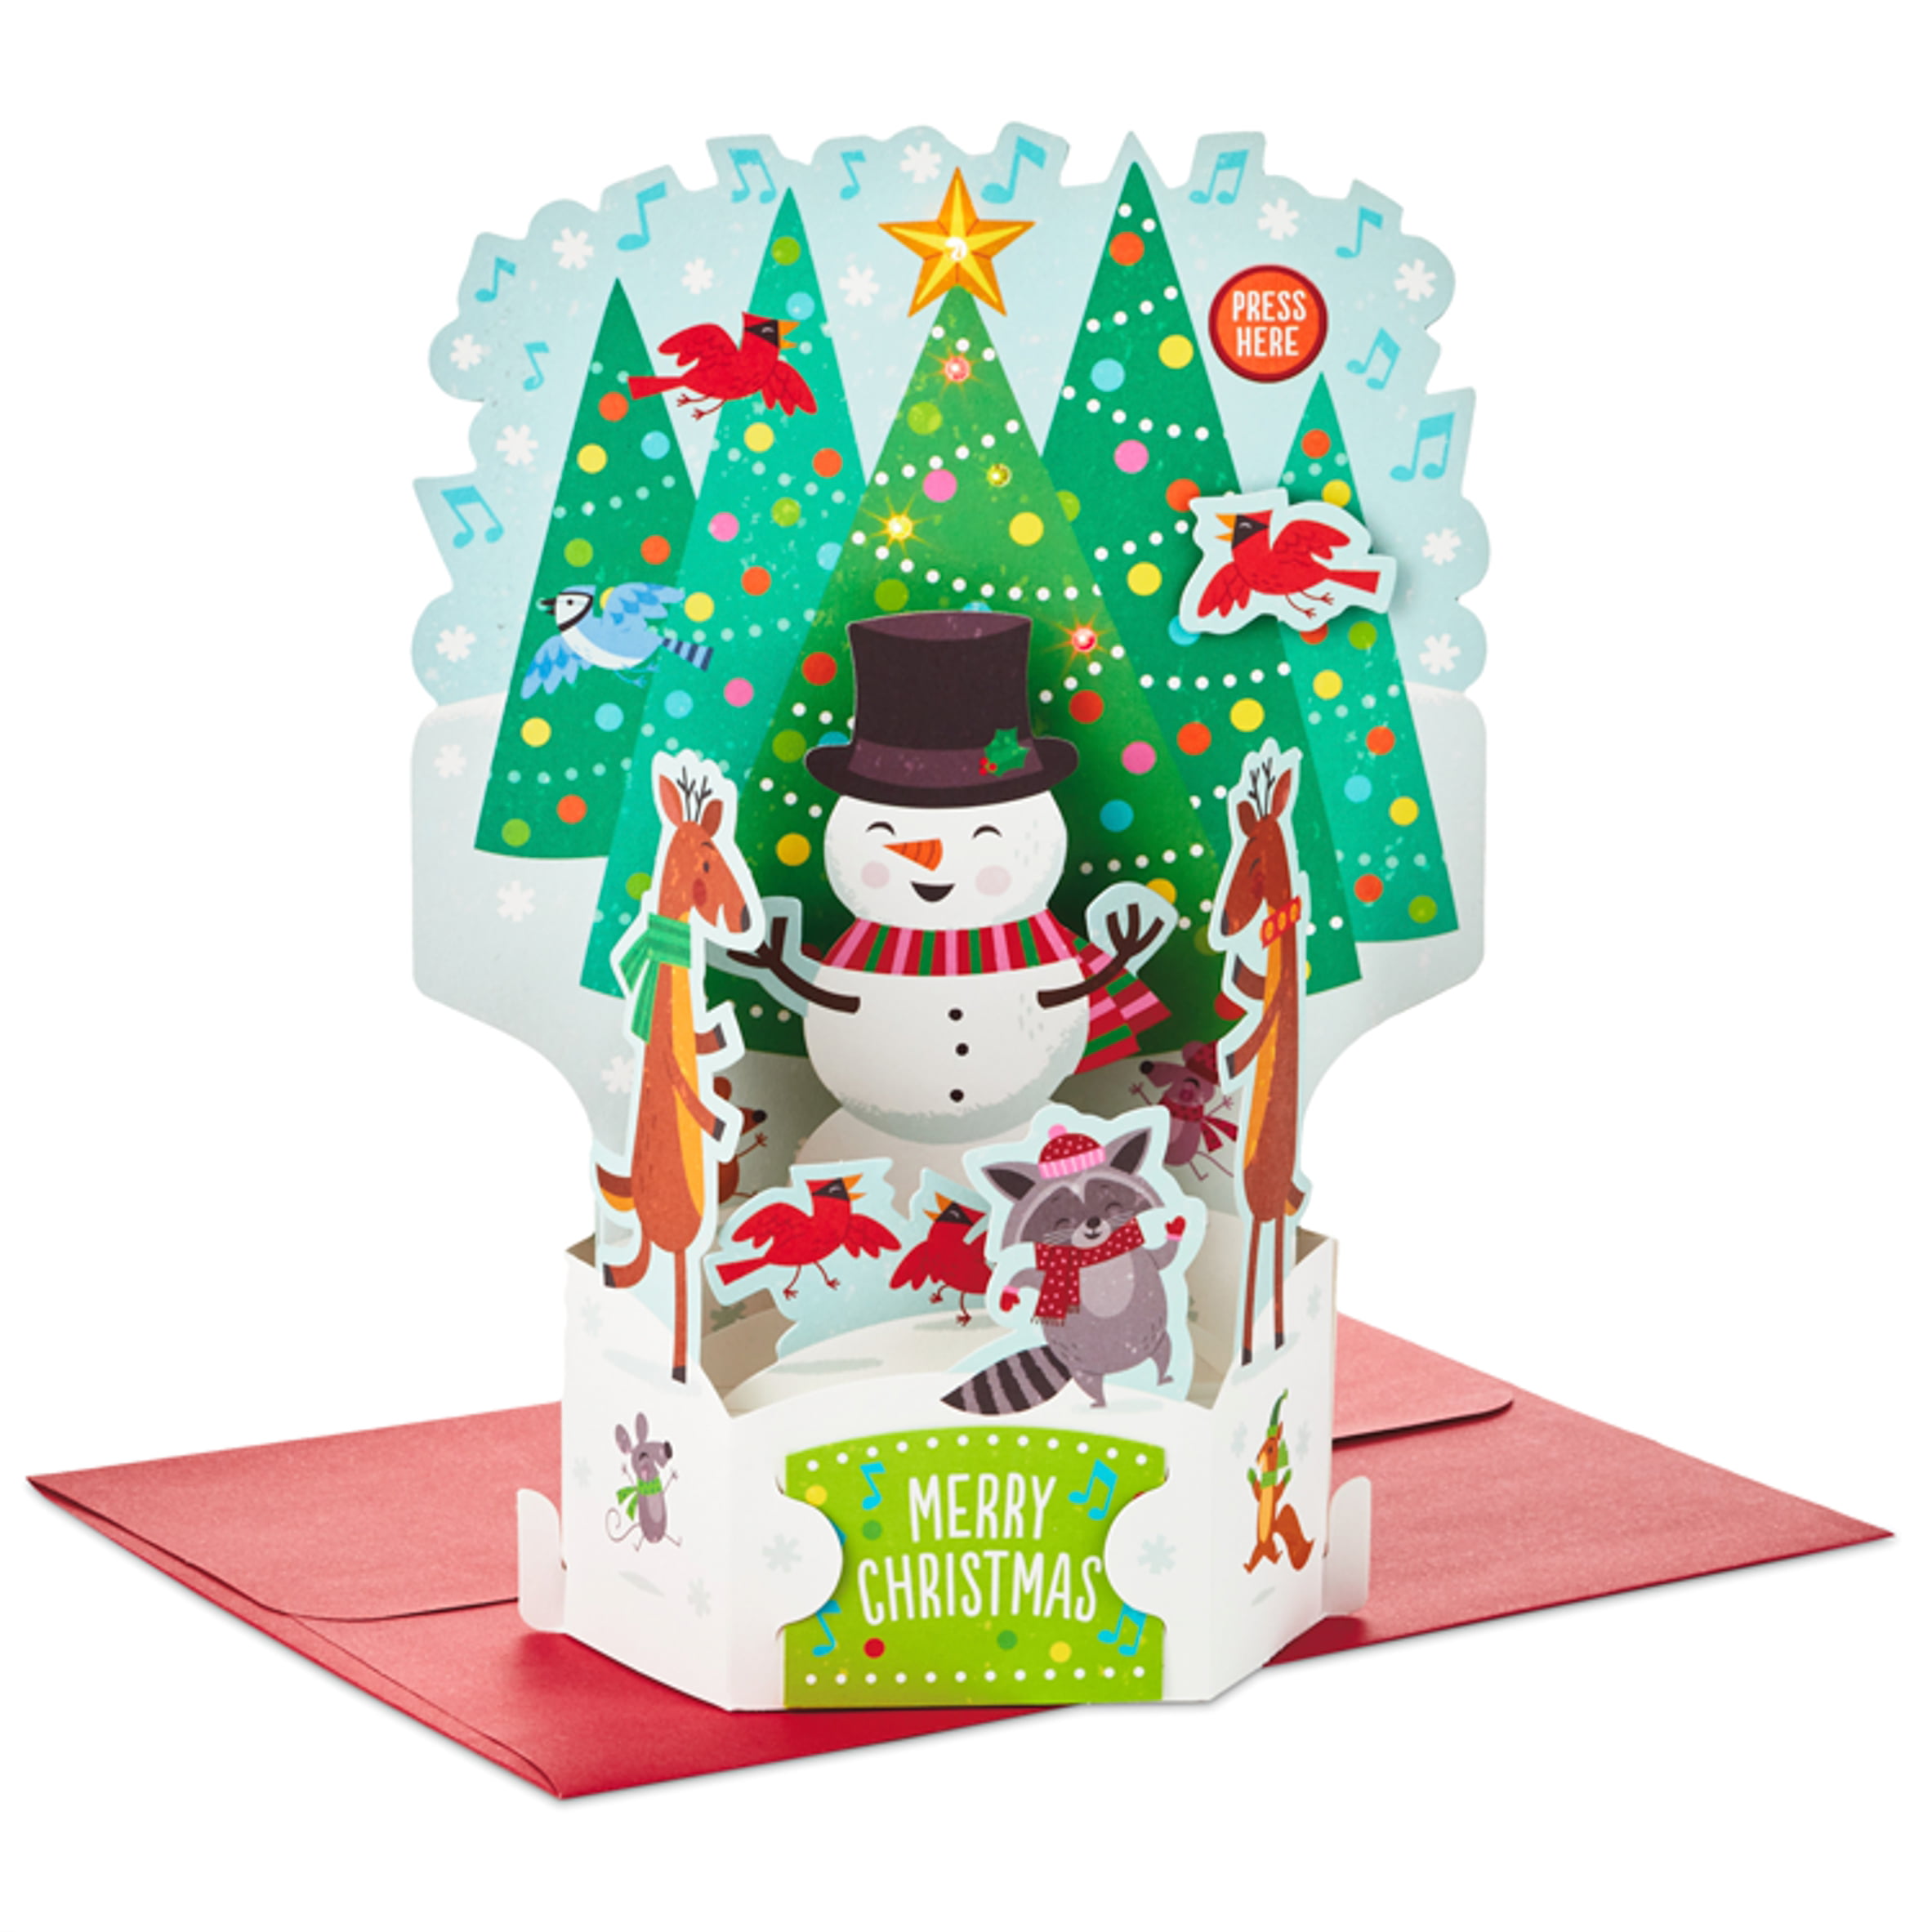 NEW Merry Santa Trimming Traditions 16ct Christmas Cards with Envelopes 